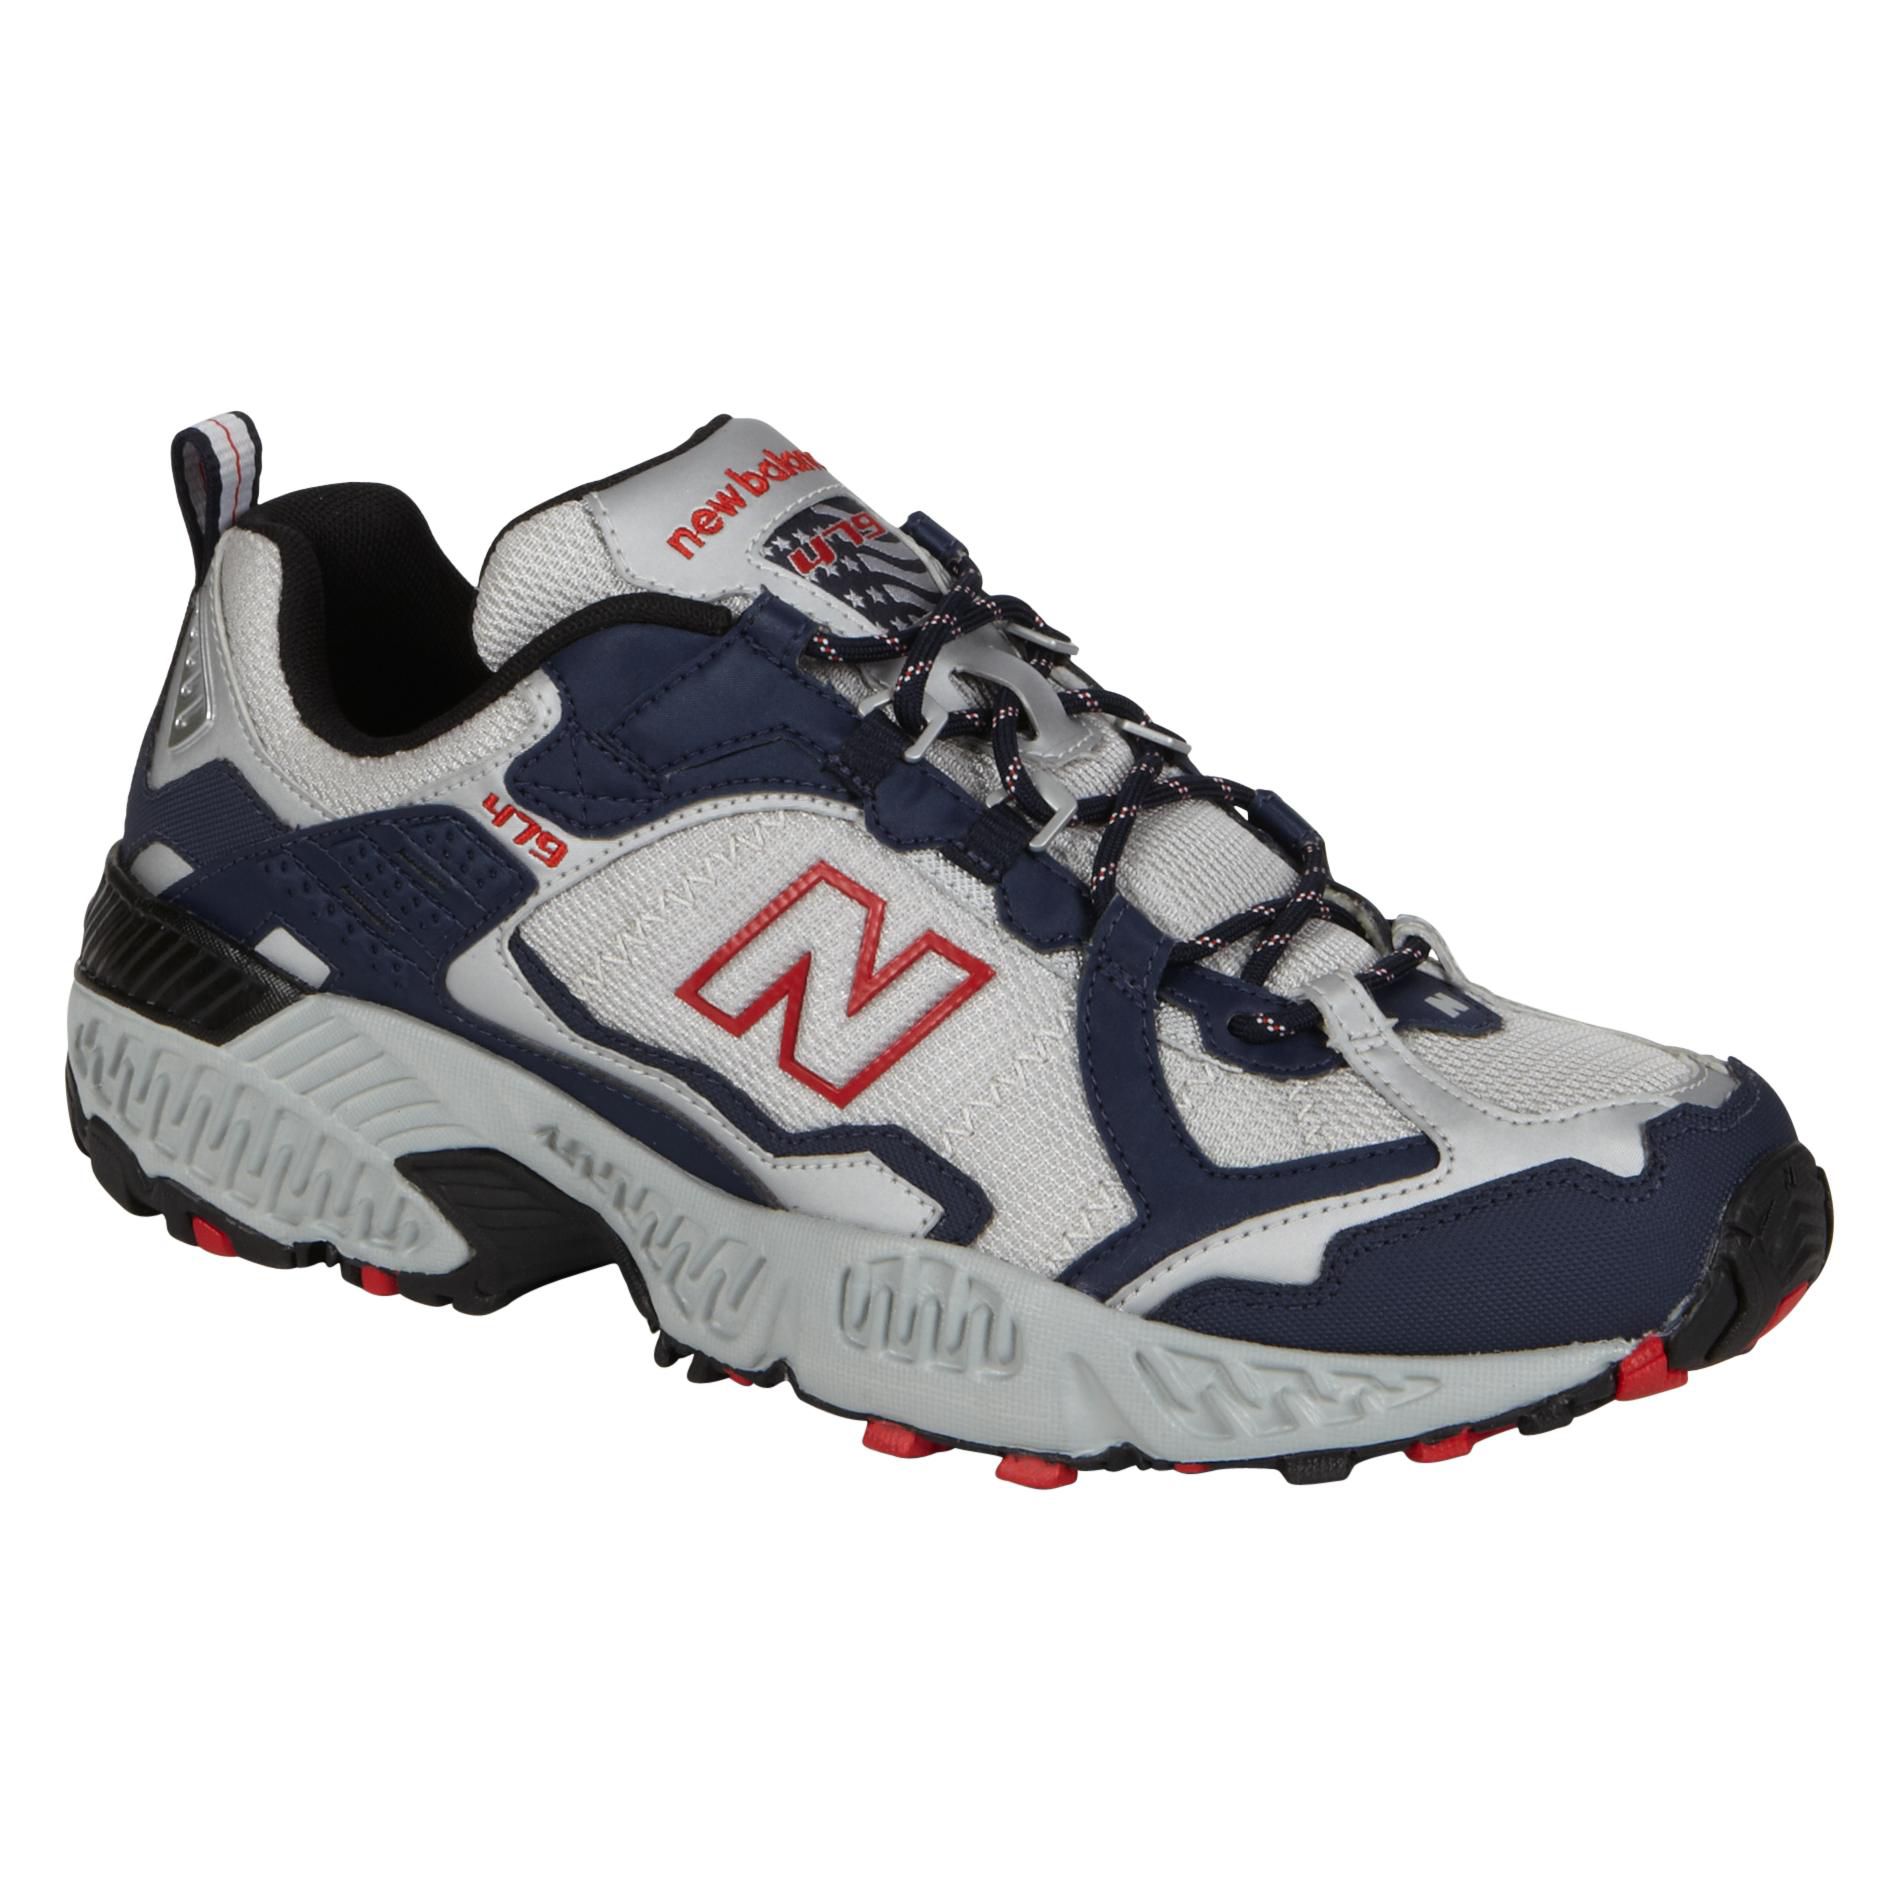 New Balance Men\u0027s 479 USA Trail Running Athletic Shoe - White/Navy/Red |  Shop Your Way: Online Shopping \u0026 Earn Points on Tools, Appliances,  Electronics \u0026 ...